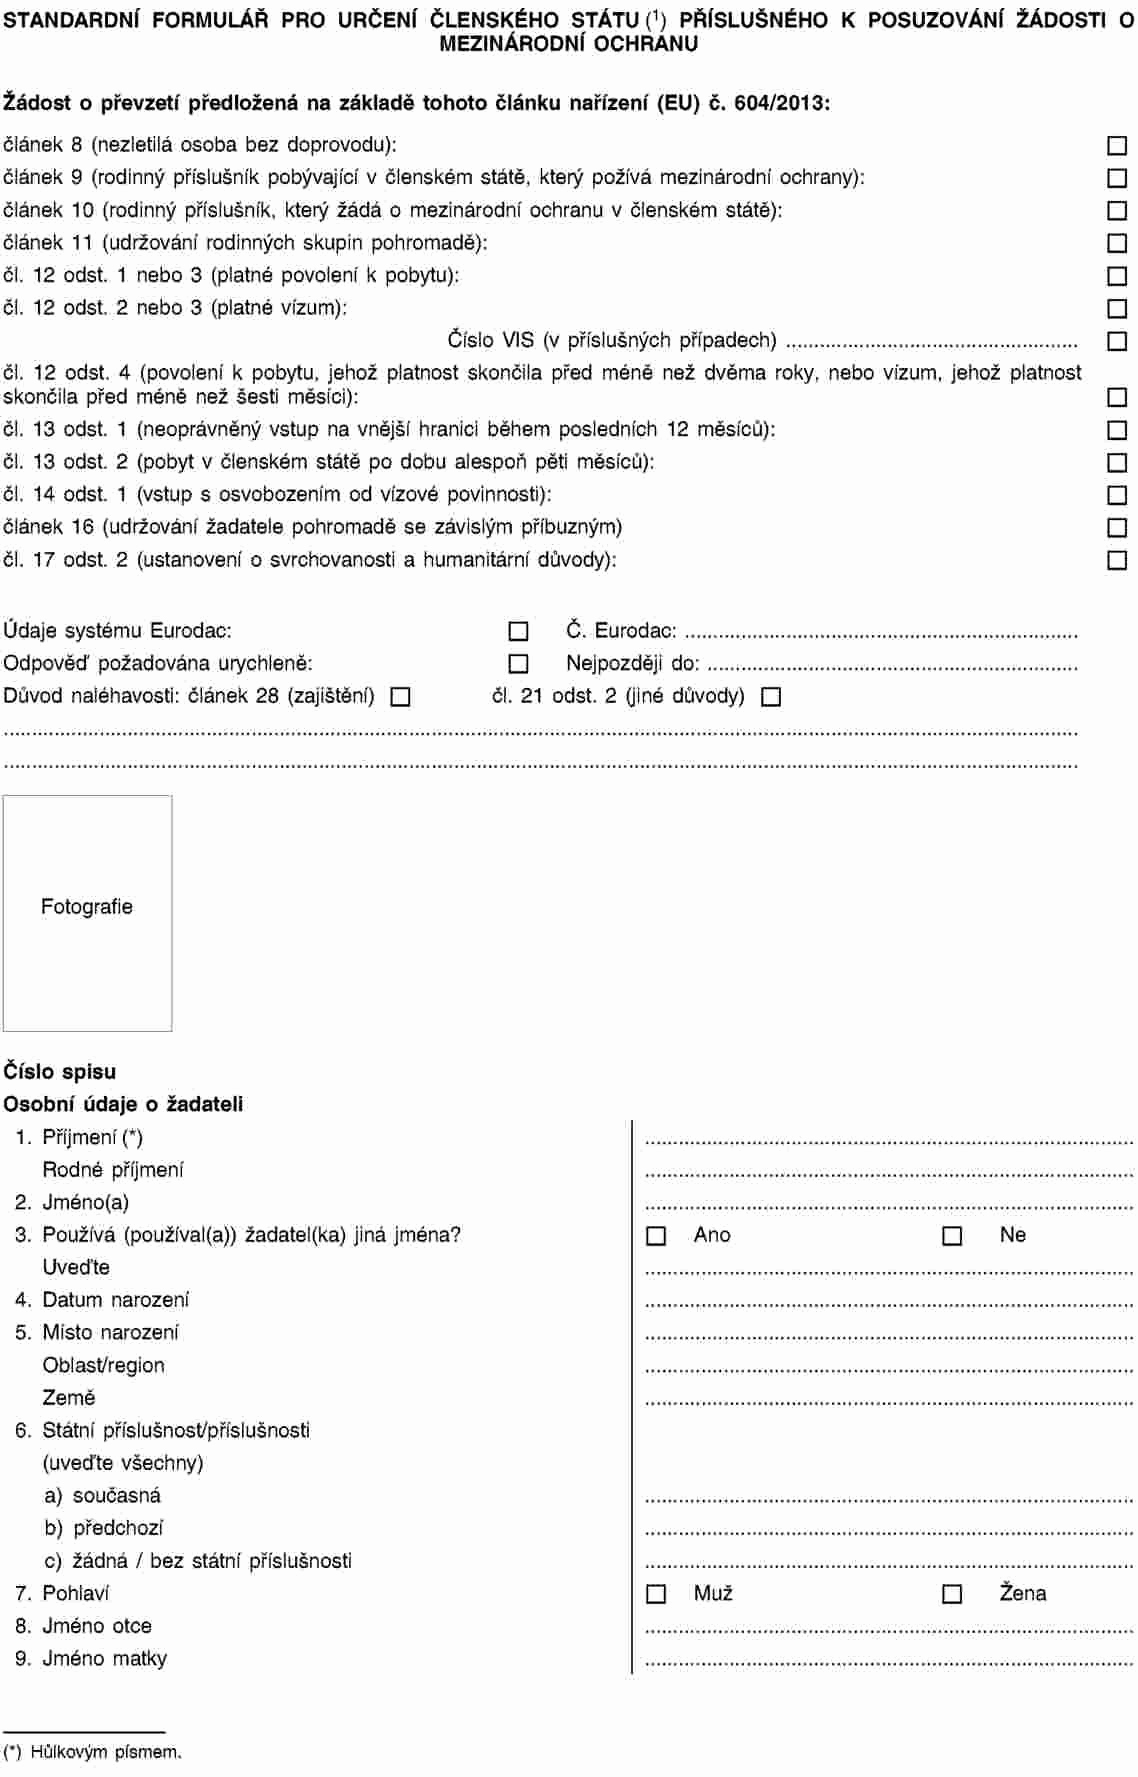 Family therapy Communication Worksheets Awesome 30 Family therapy Munication Worksheets